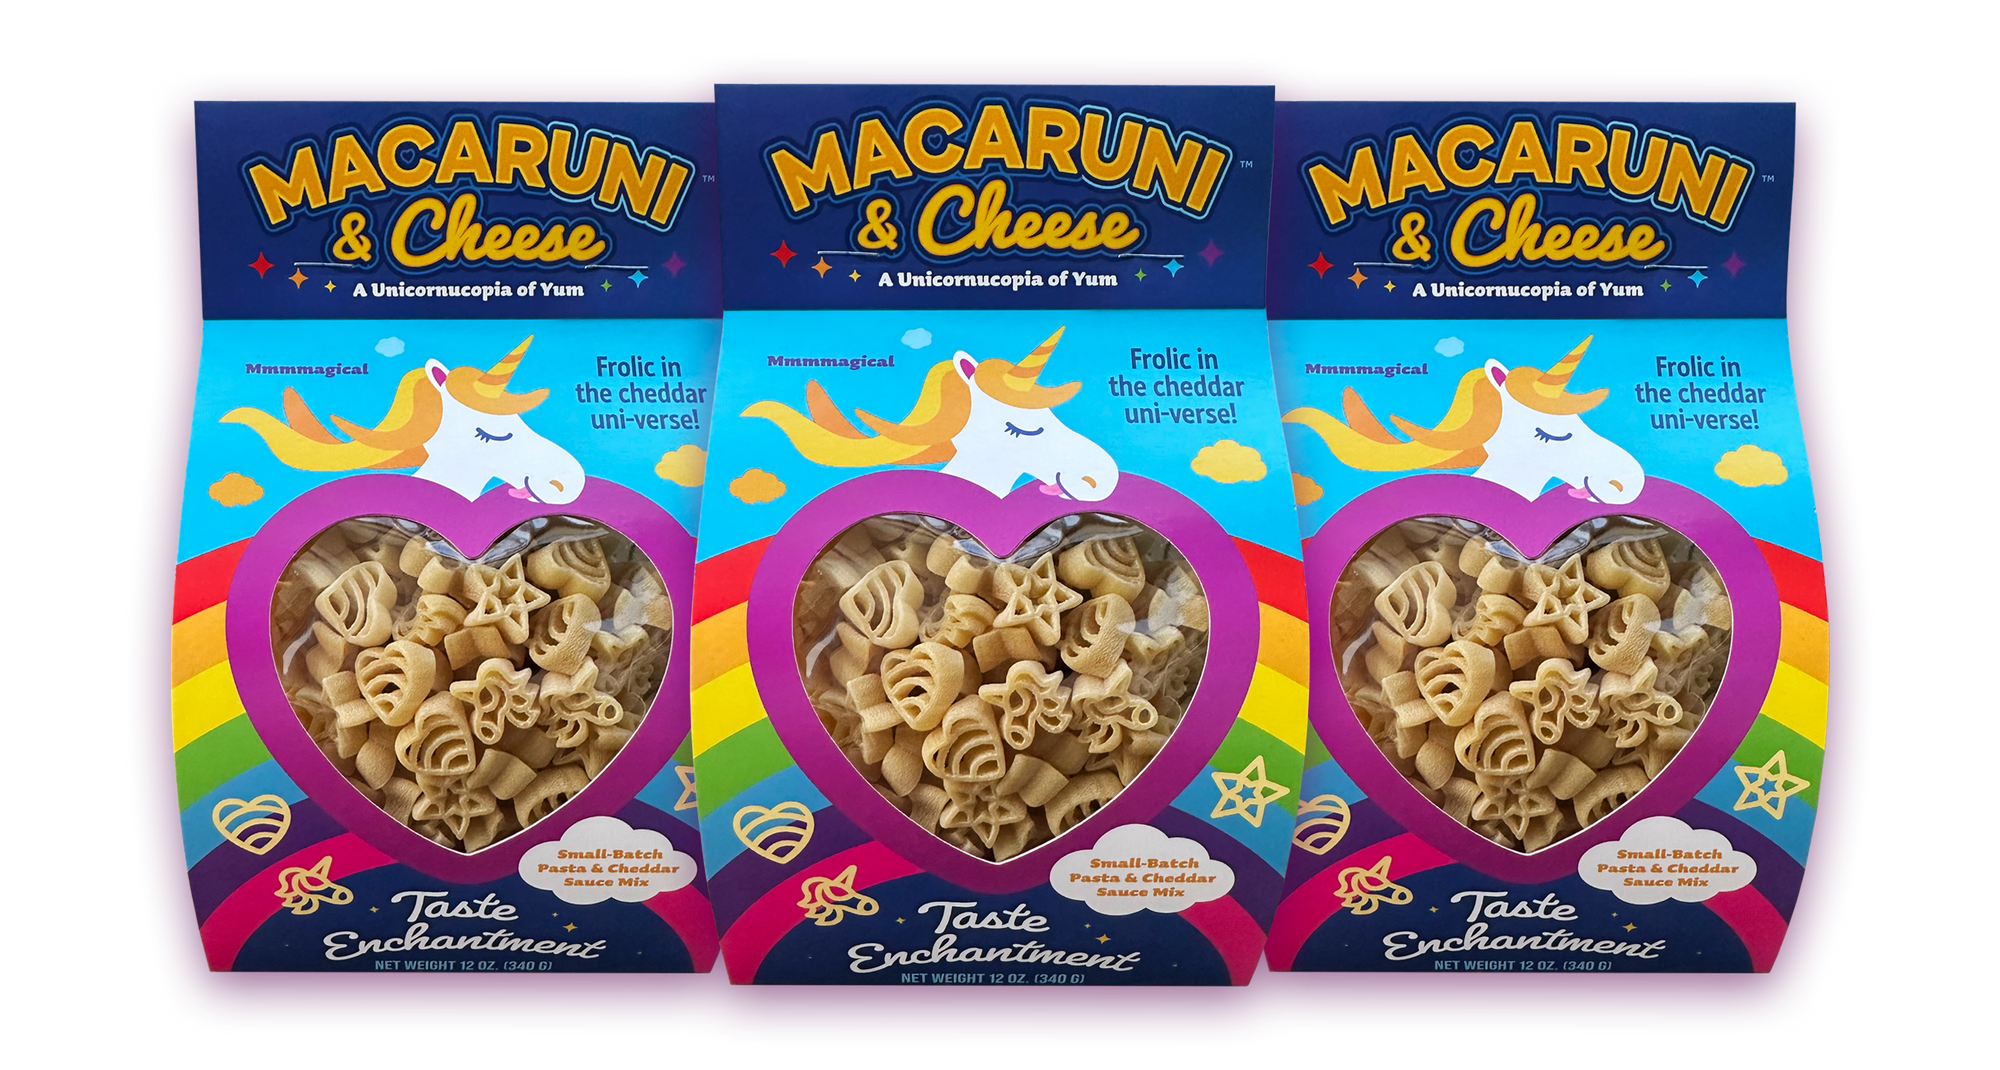 Macaruni & Cheese - A Unicornucopia of Yum - Mmmmagical - Frolic in the cheddar uni-verse - Samll-Batch Pasta & Cheddar Sauce Mix - Taste Enchantment - Net Weight 12oz - 3 packages of product with Unicorns, rainbow, heart and star